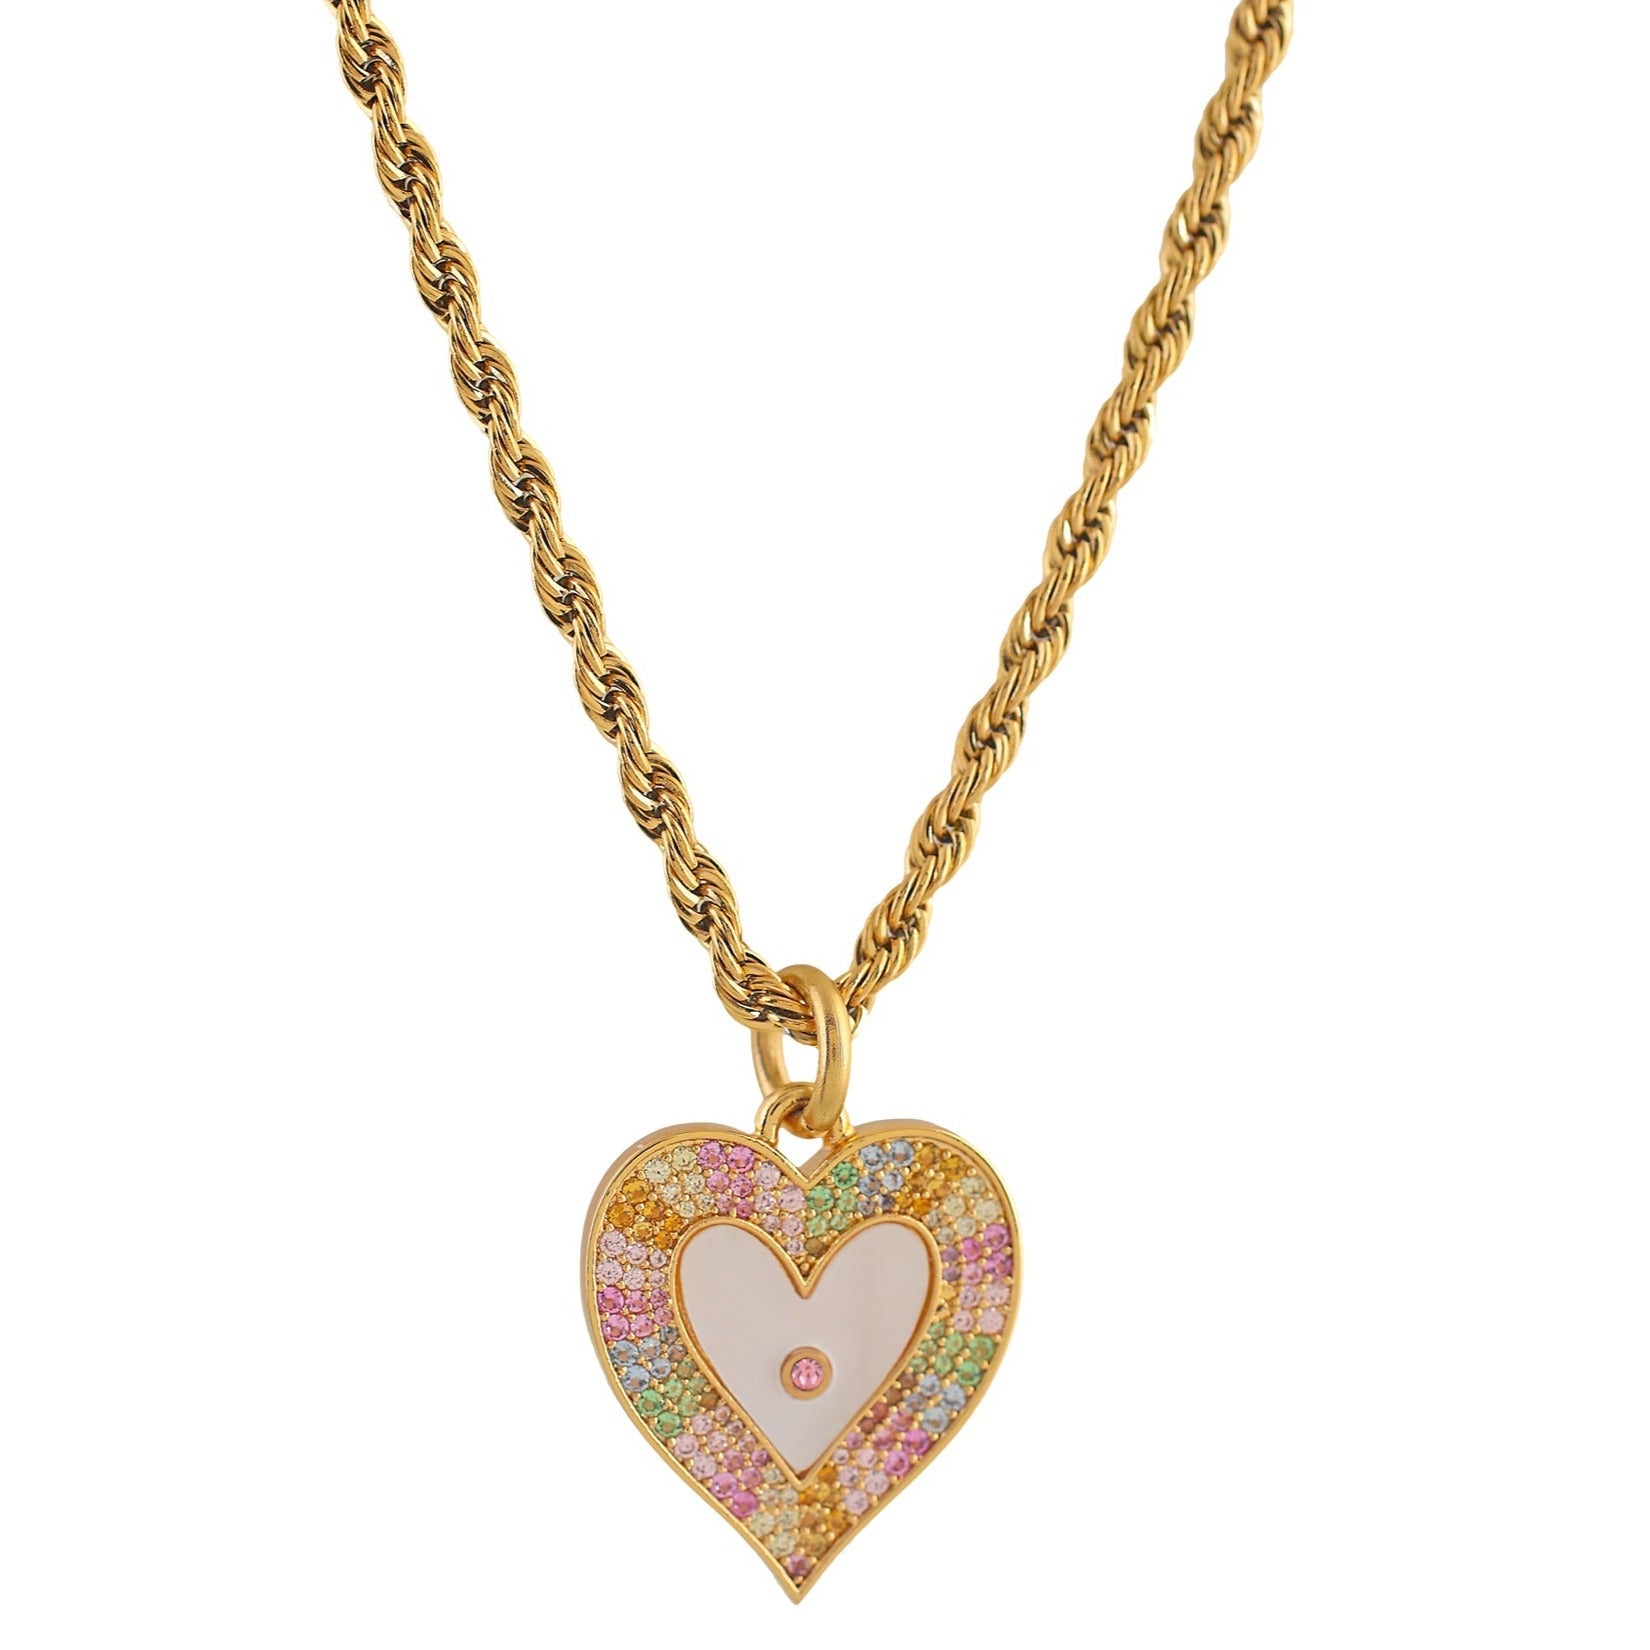 'FREEDOM' Mother Pearl Heart Necklace